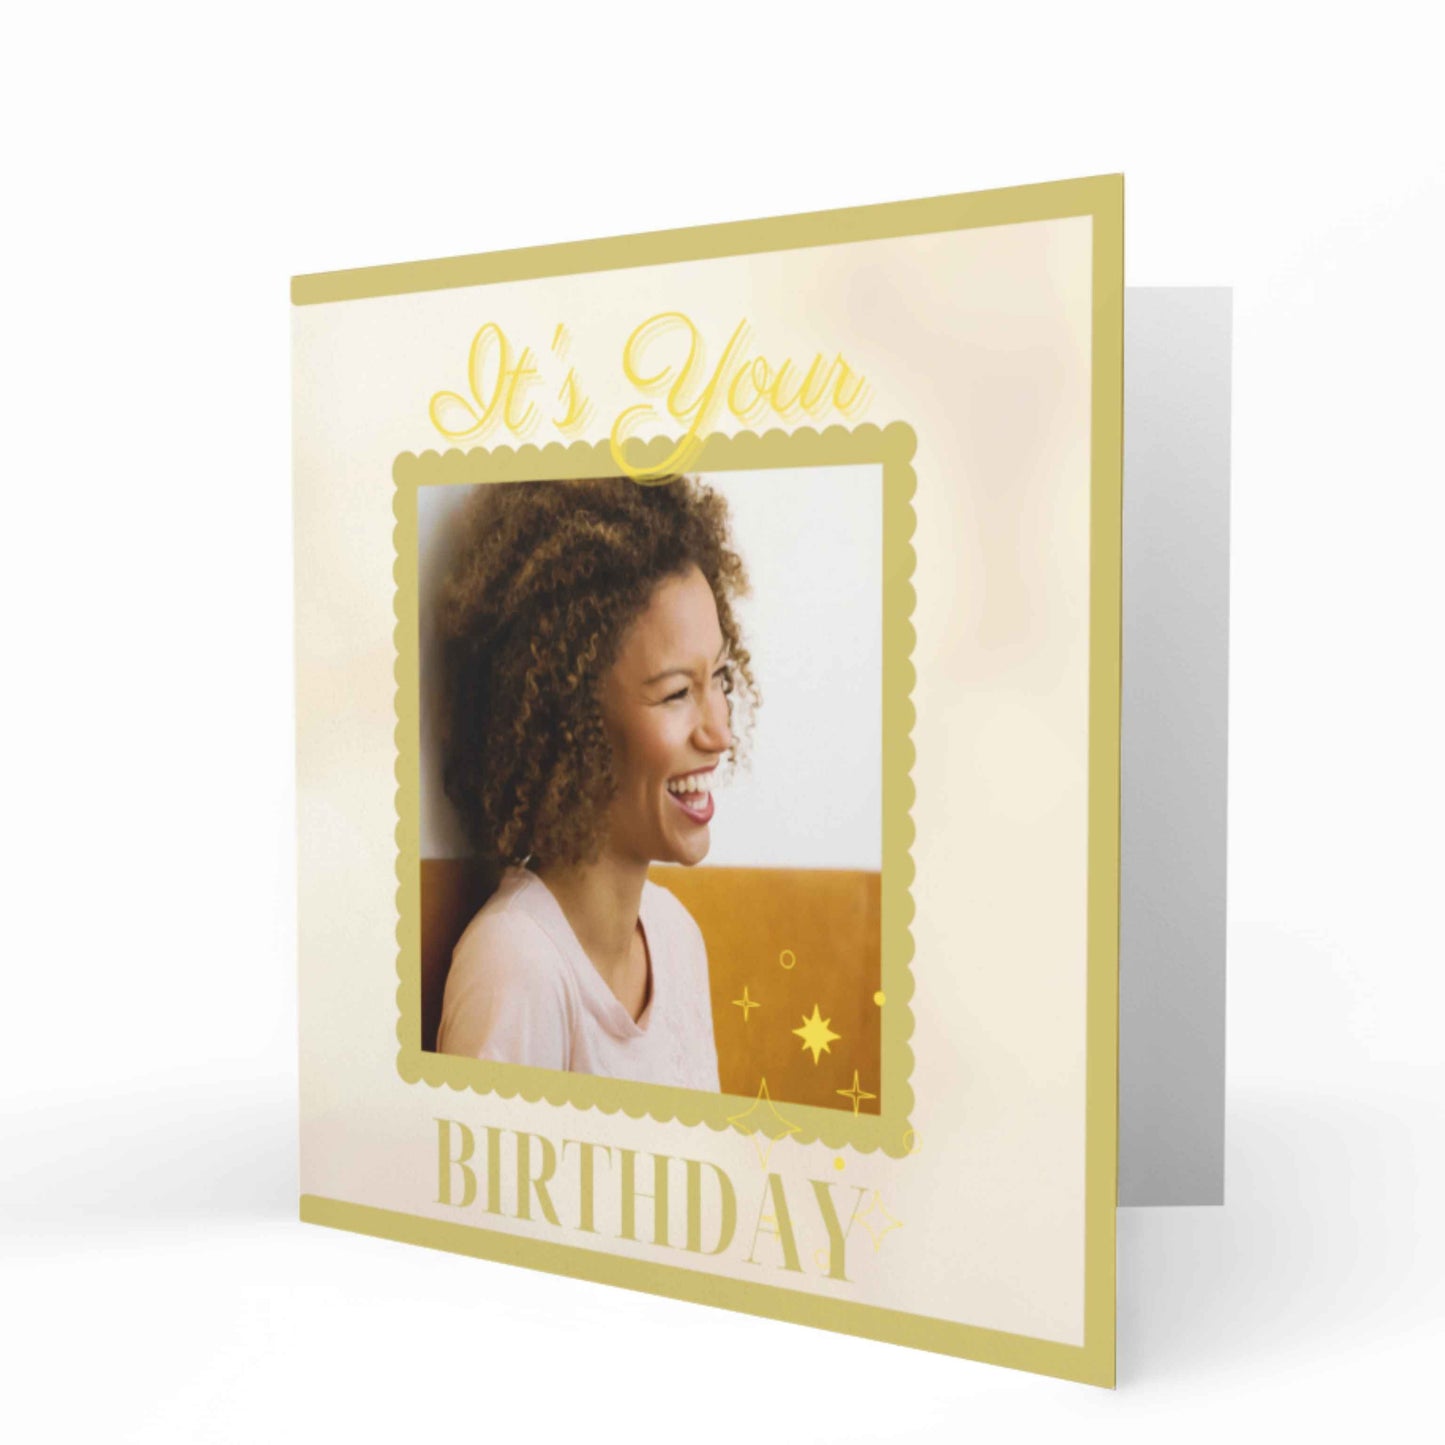 Birthday Cards | Square | Photo Upload | It's Your Birthday